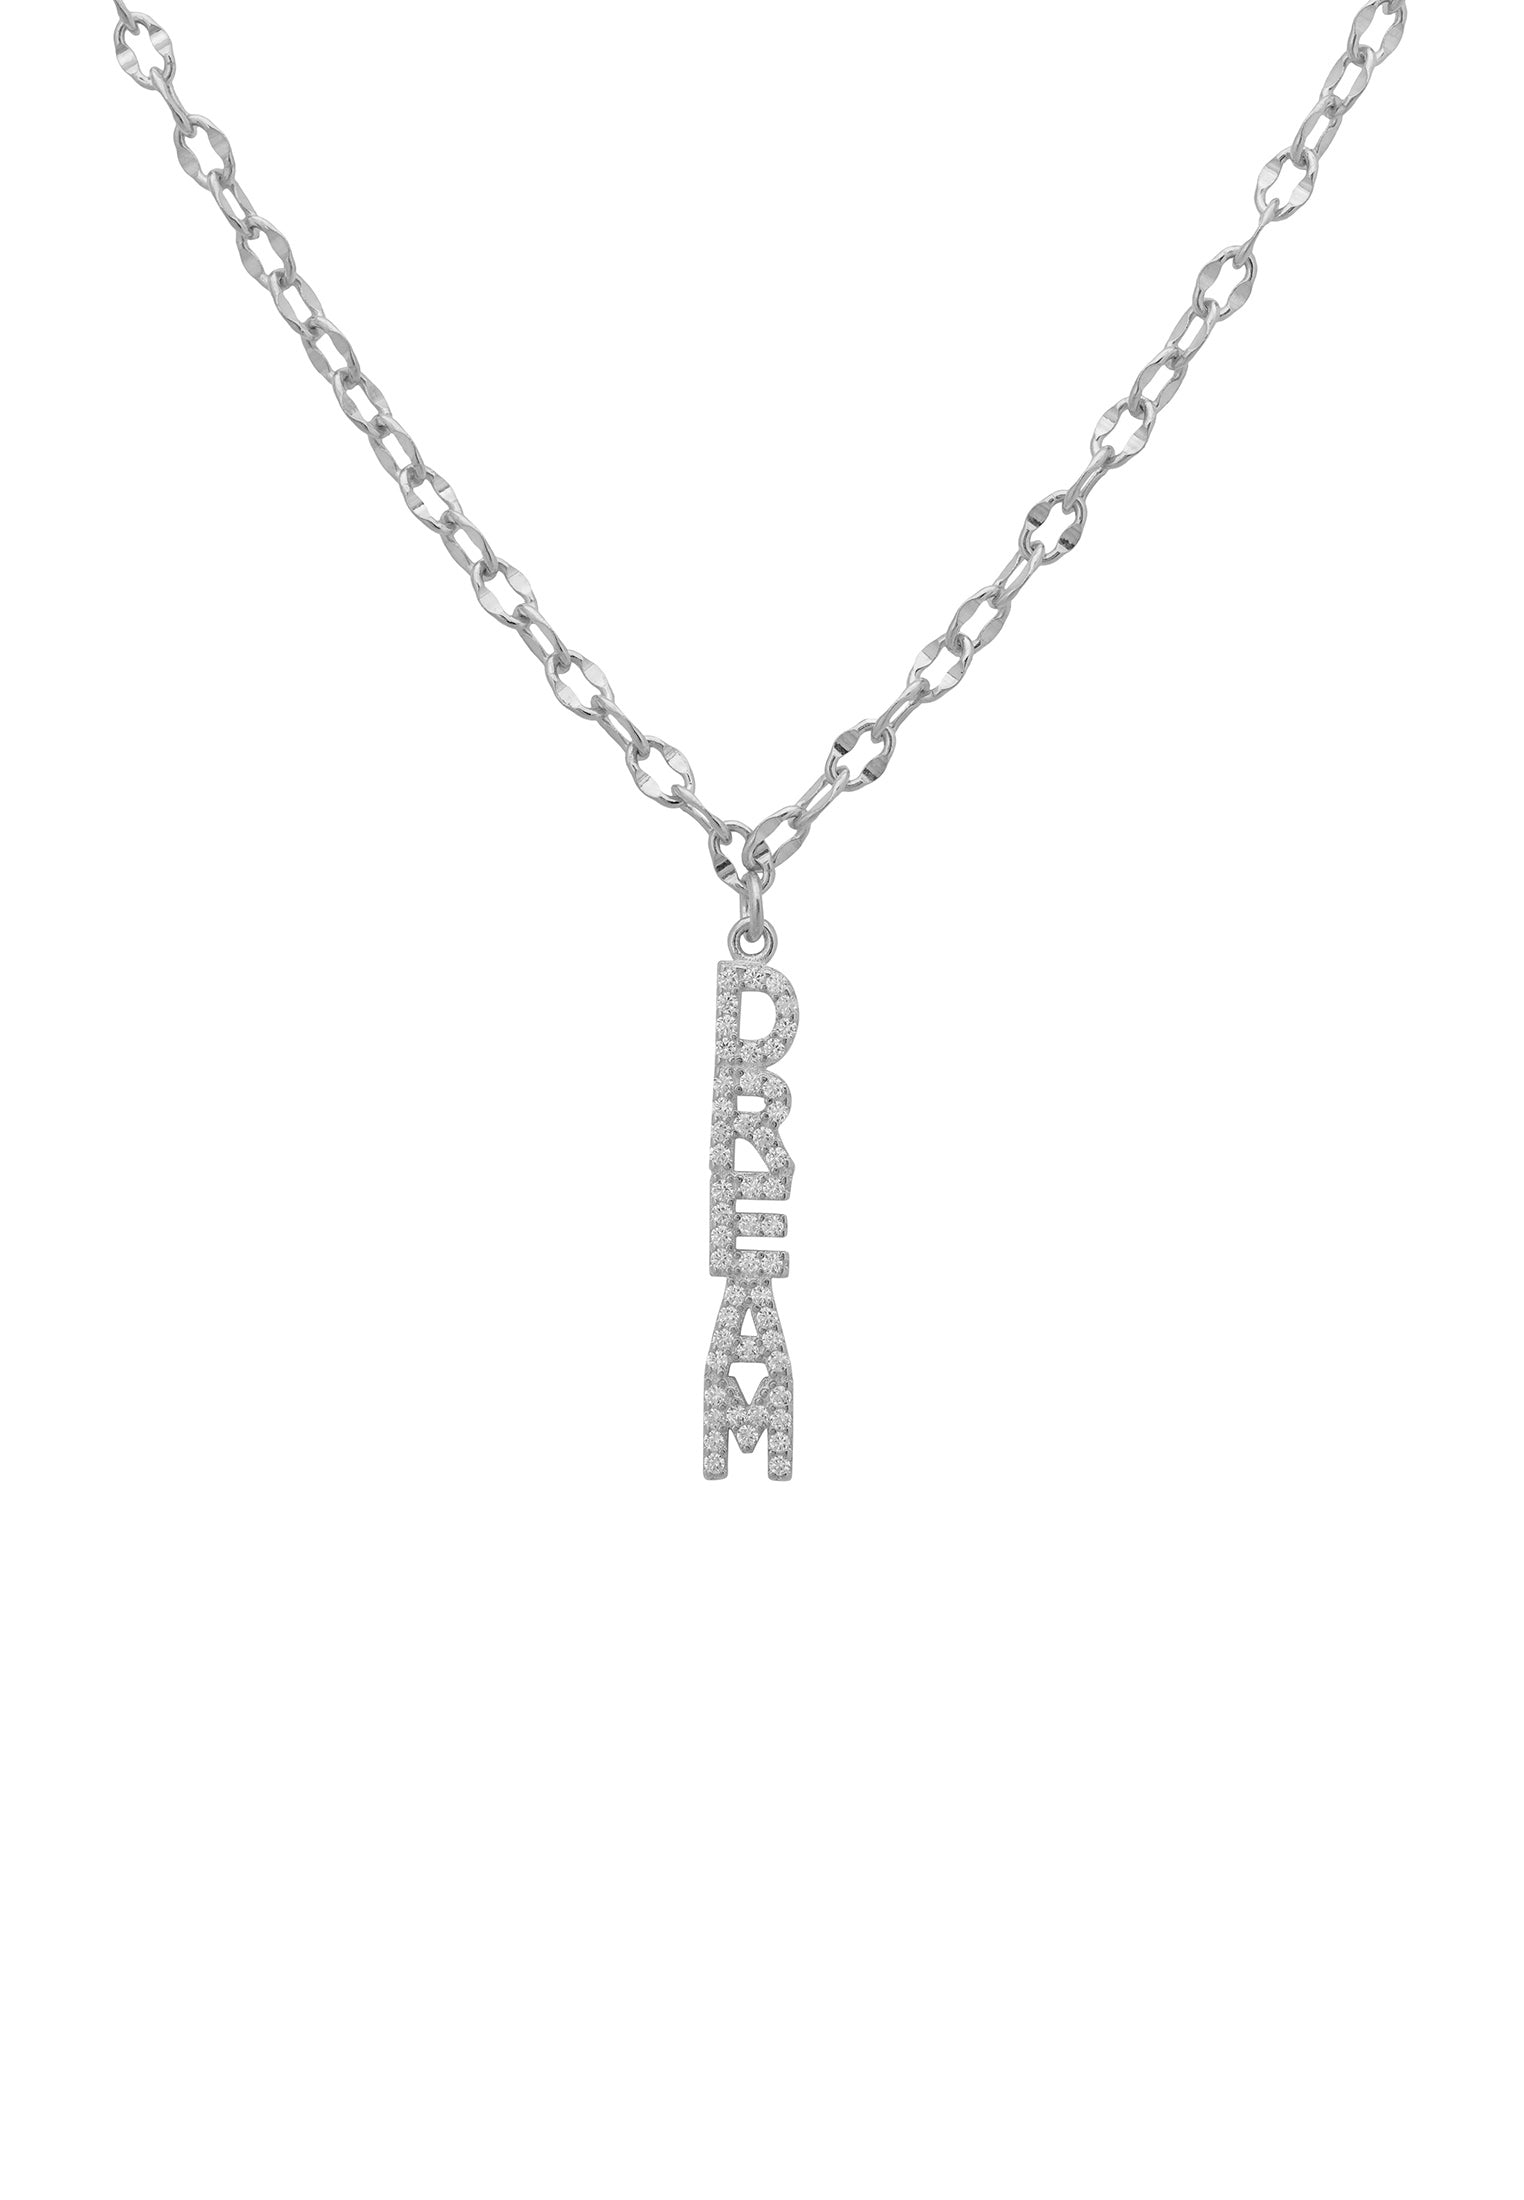 Sparkling Dream Pendant Necklace in Sterling Silver with Cubic Zirconia - Ideal Birthday Gift Idea - Jewelry & Watches - Bijou Her -  -  - 